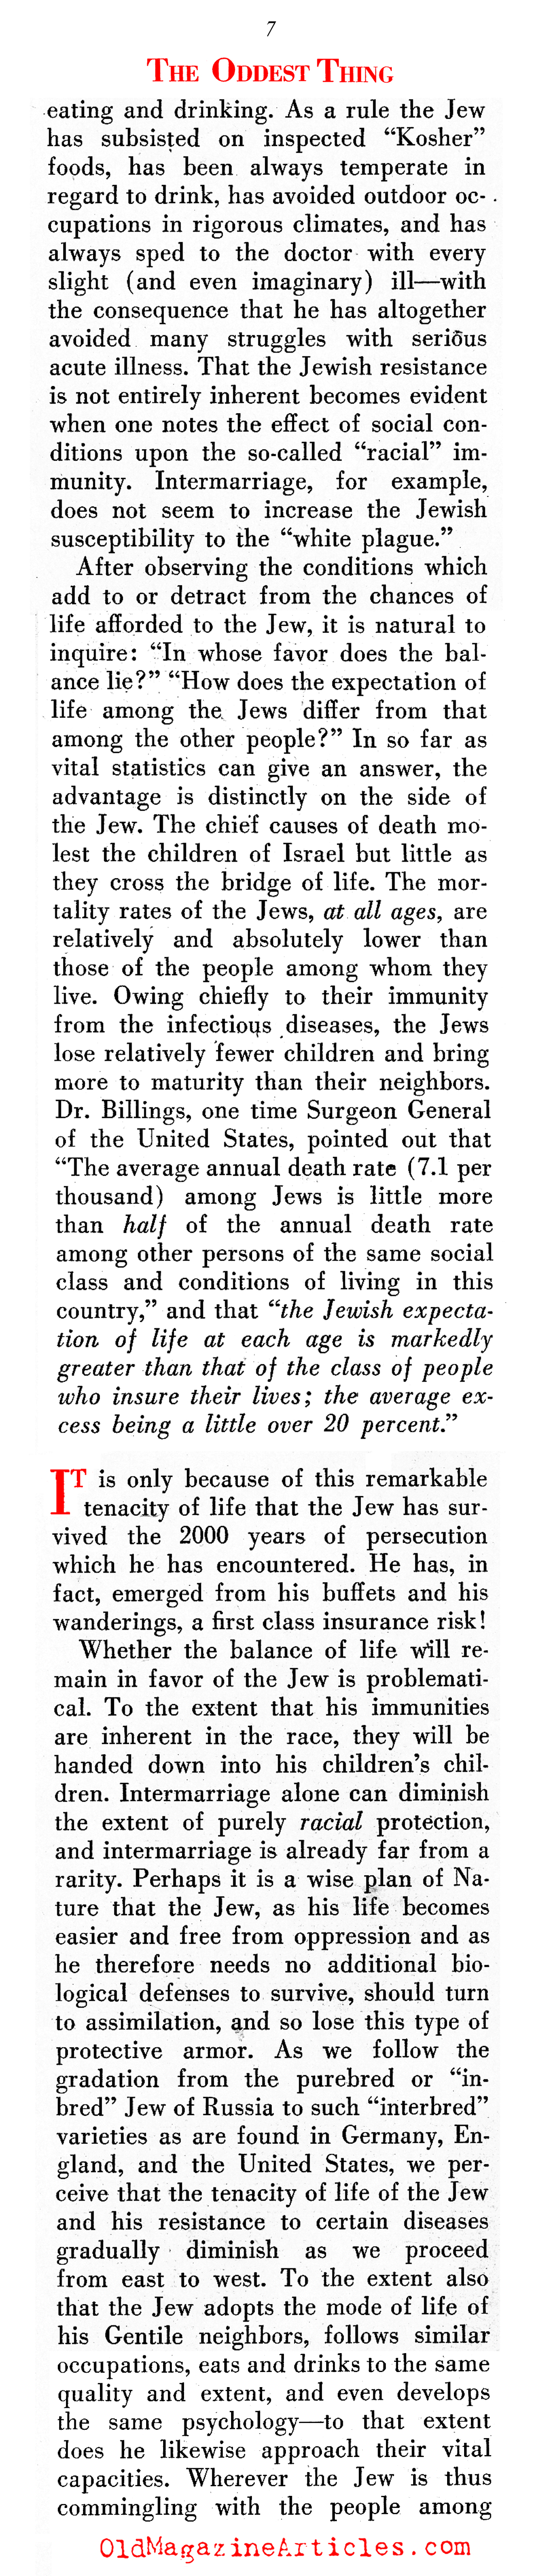 ''The Oddest Thing About the Jews'' (Scientific Americans, 1935)